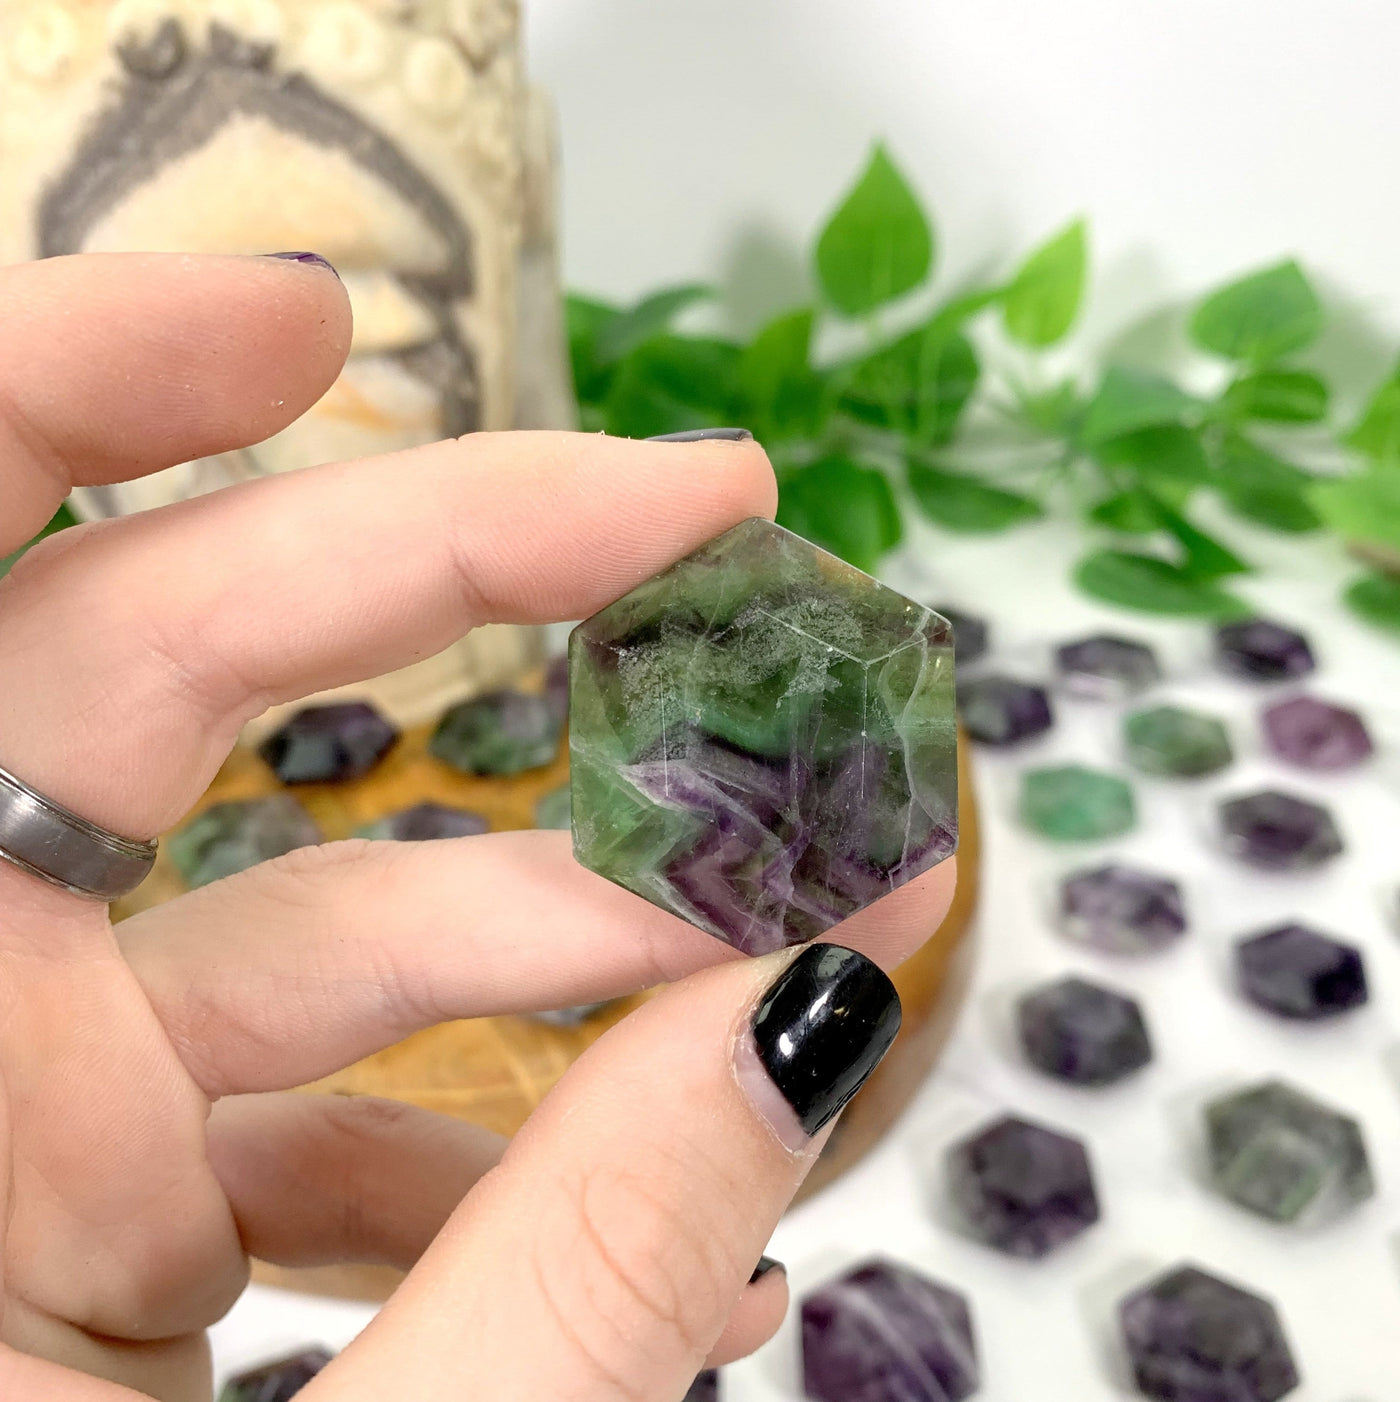 hand holding up hexagonal fluorite polished stone with decorations blurred in the background